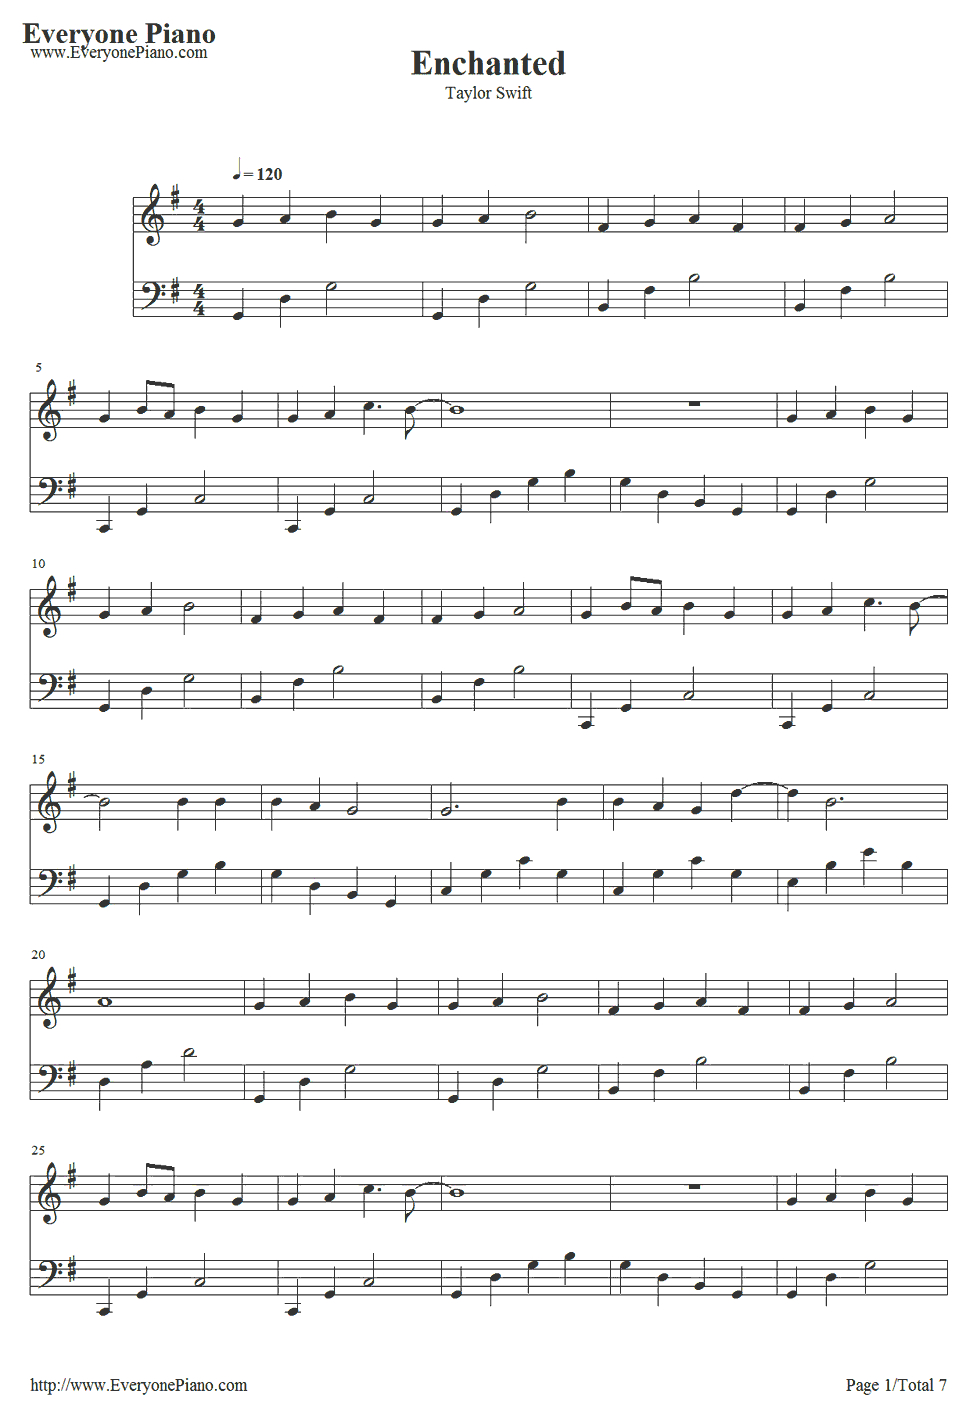 Enchanted-Taylor Swift Stave Preview 1 | Piano Pieces In 2019 - Taylor Swift Mine Piano Sheet Music Free Printable